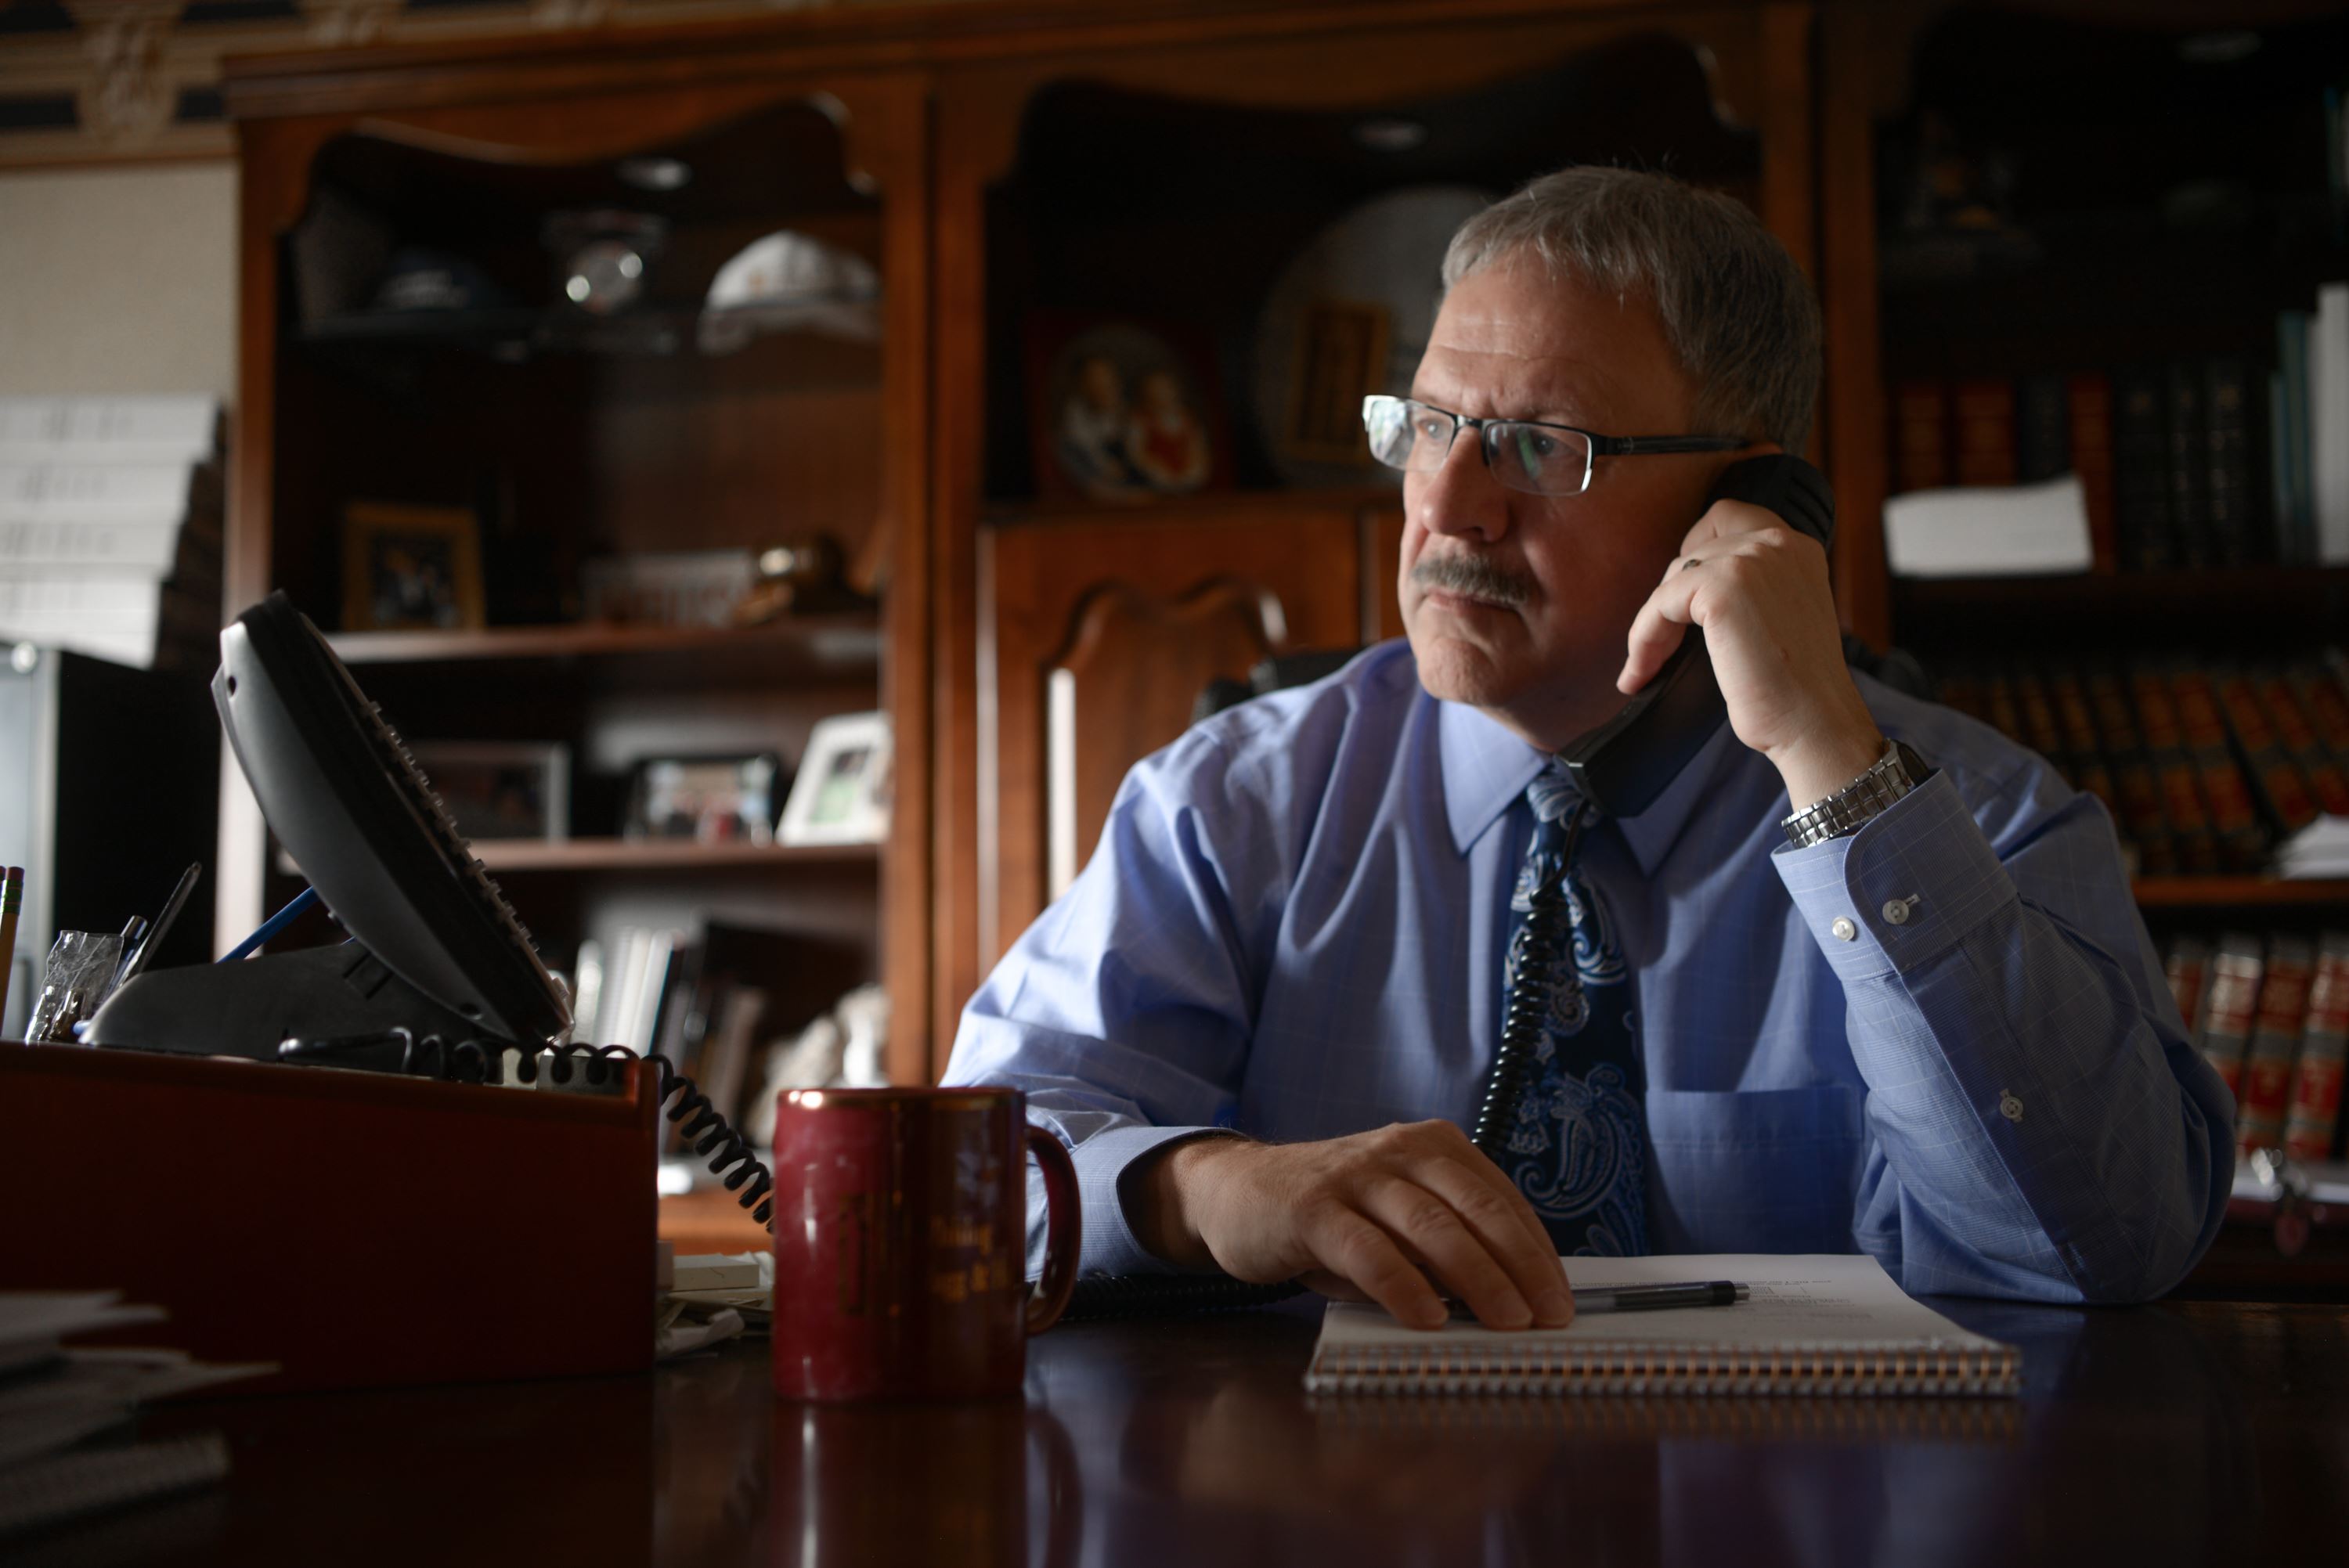 Attorney Rexford Hagg on the phone with a client